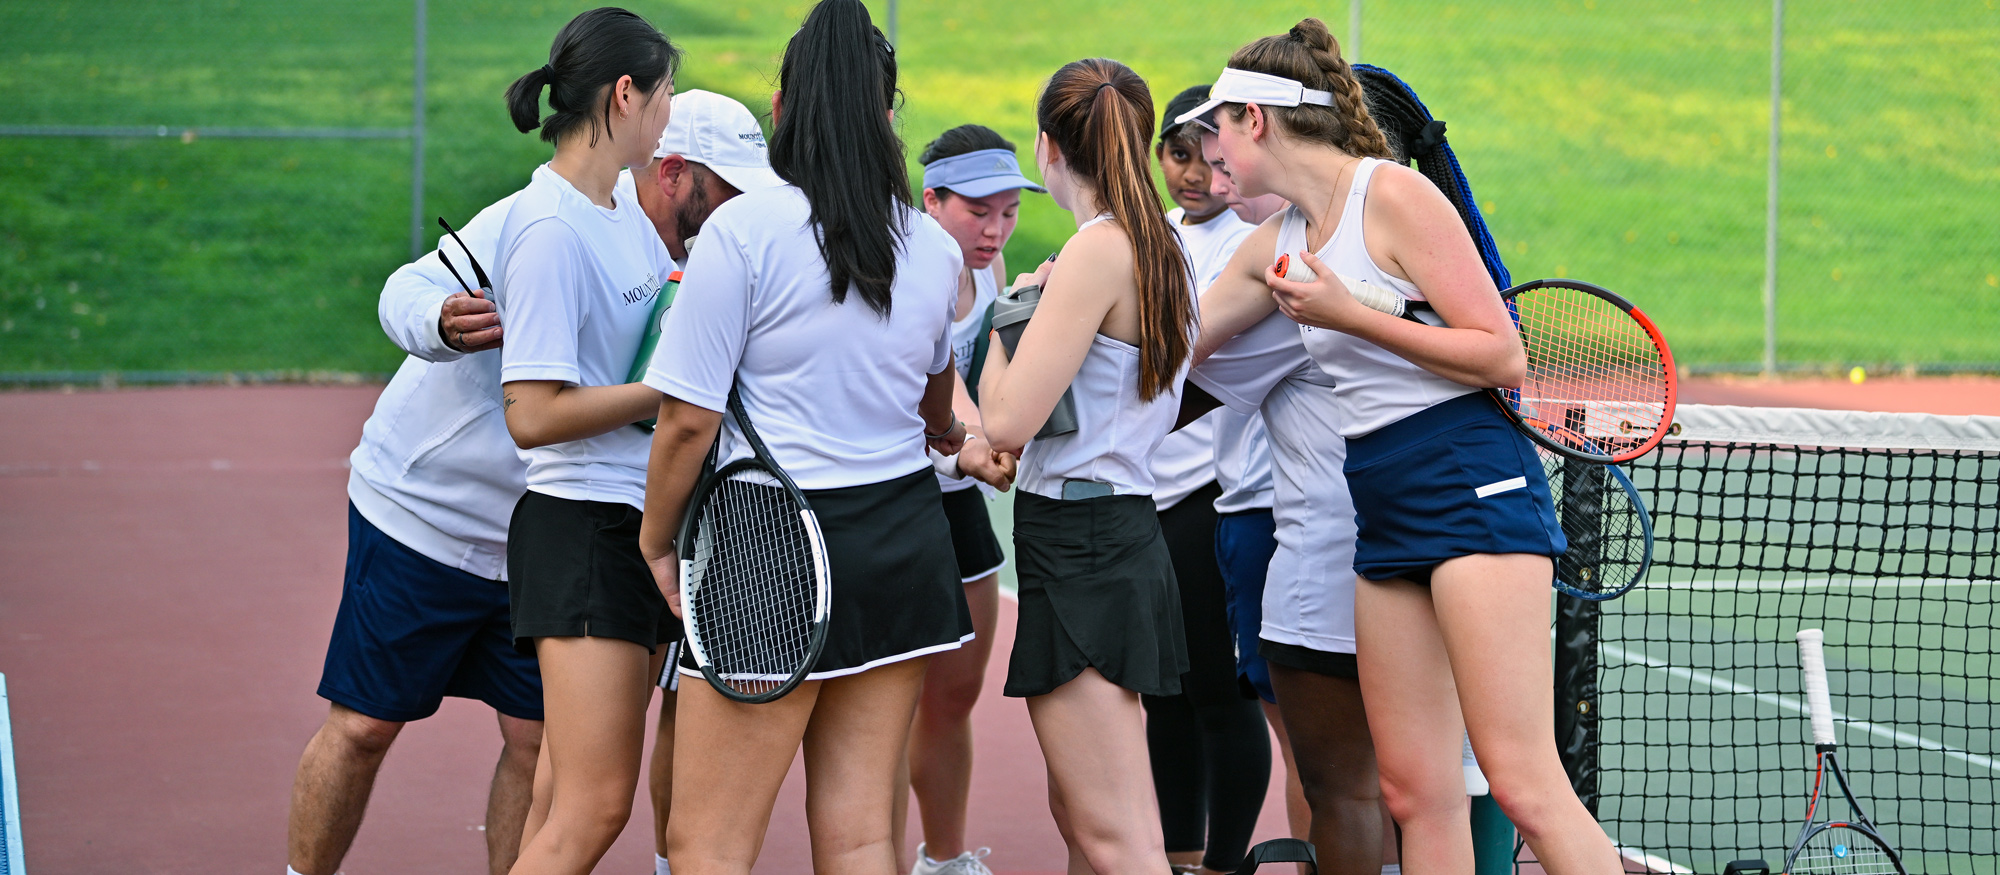 Babson College rose to 12-0 on the season with a 9-0 victory over the Mount Holyoke College tennis team in a NEWMAC match on April 14, 2023, with temperatures above 90 degrees on the MHC Tennis Courts. (Bob Blanchard/RJB Sports)